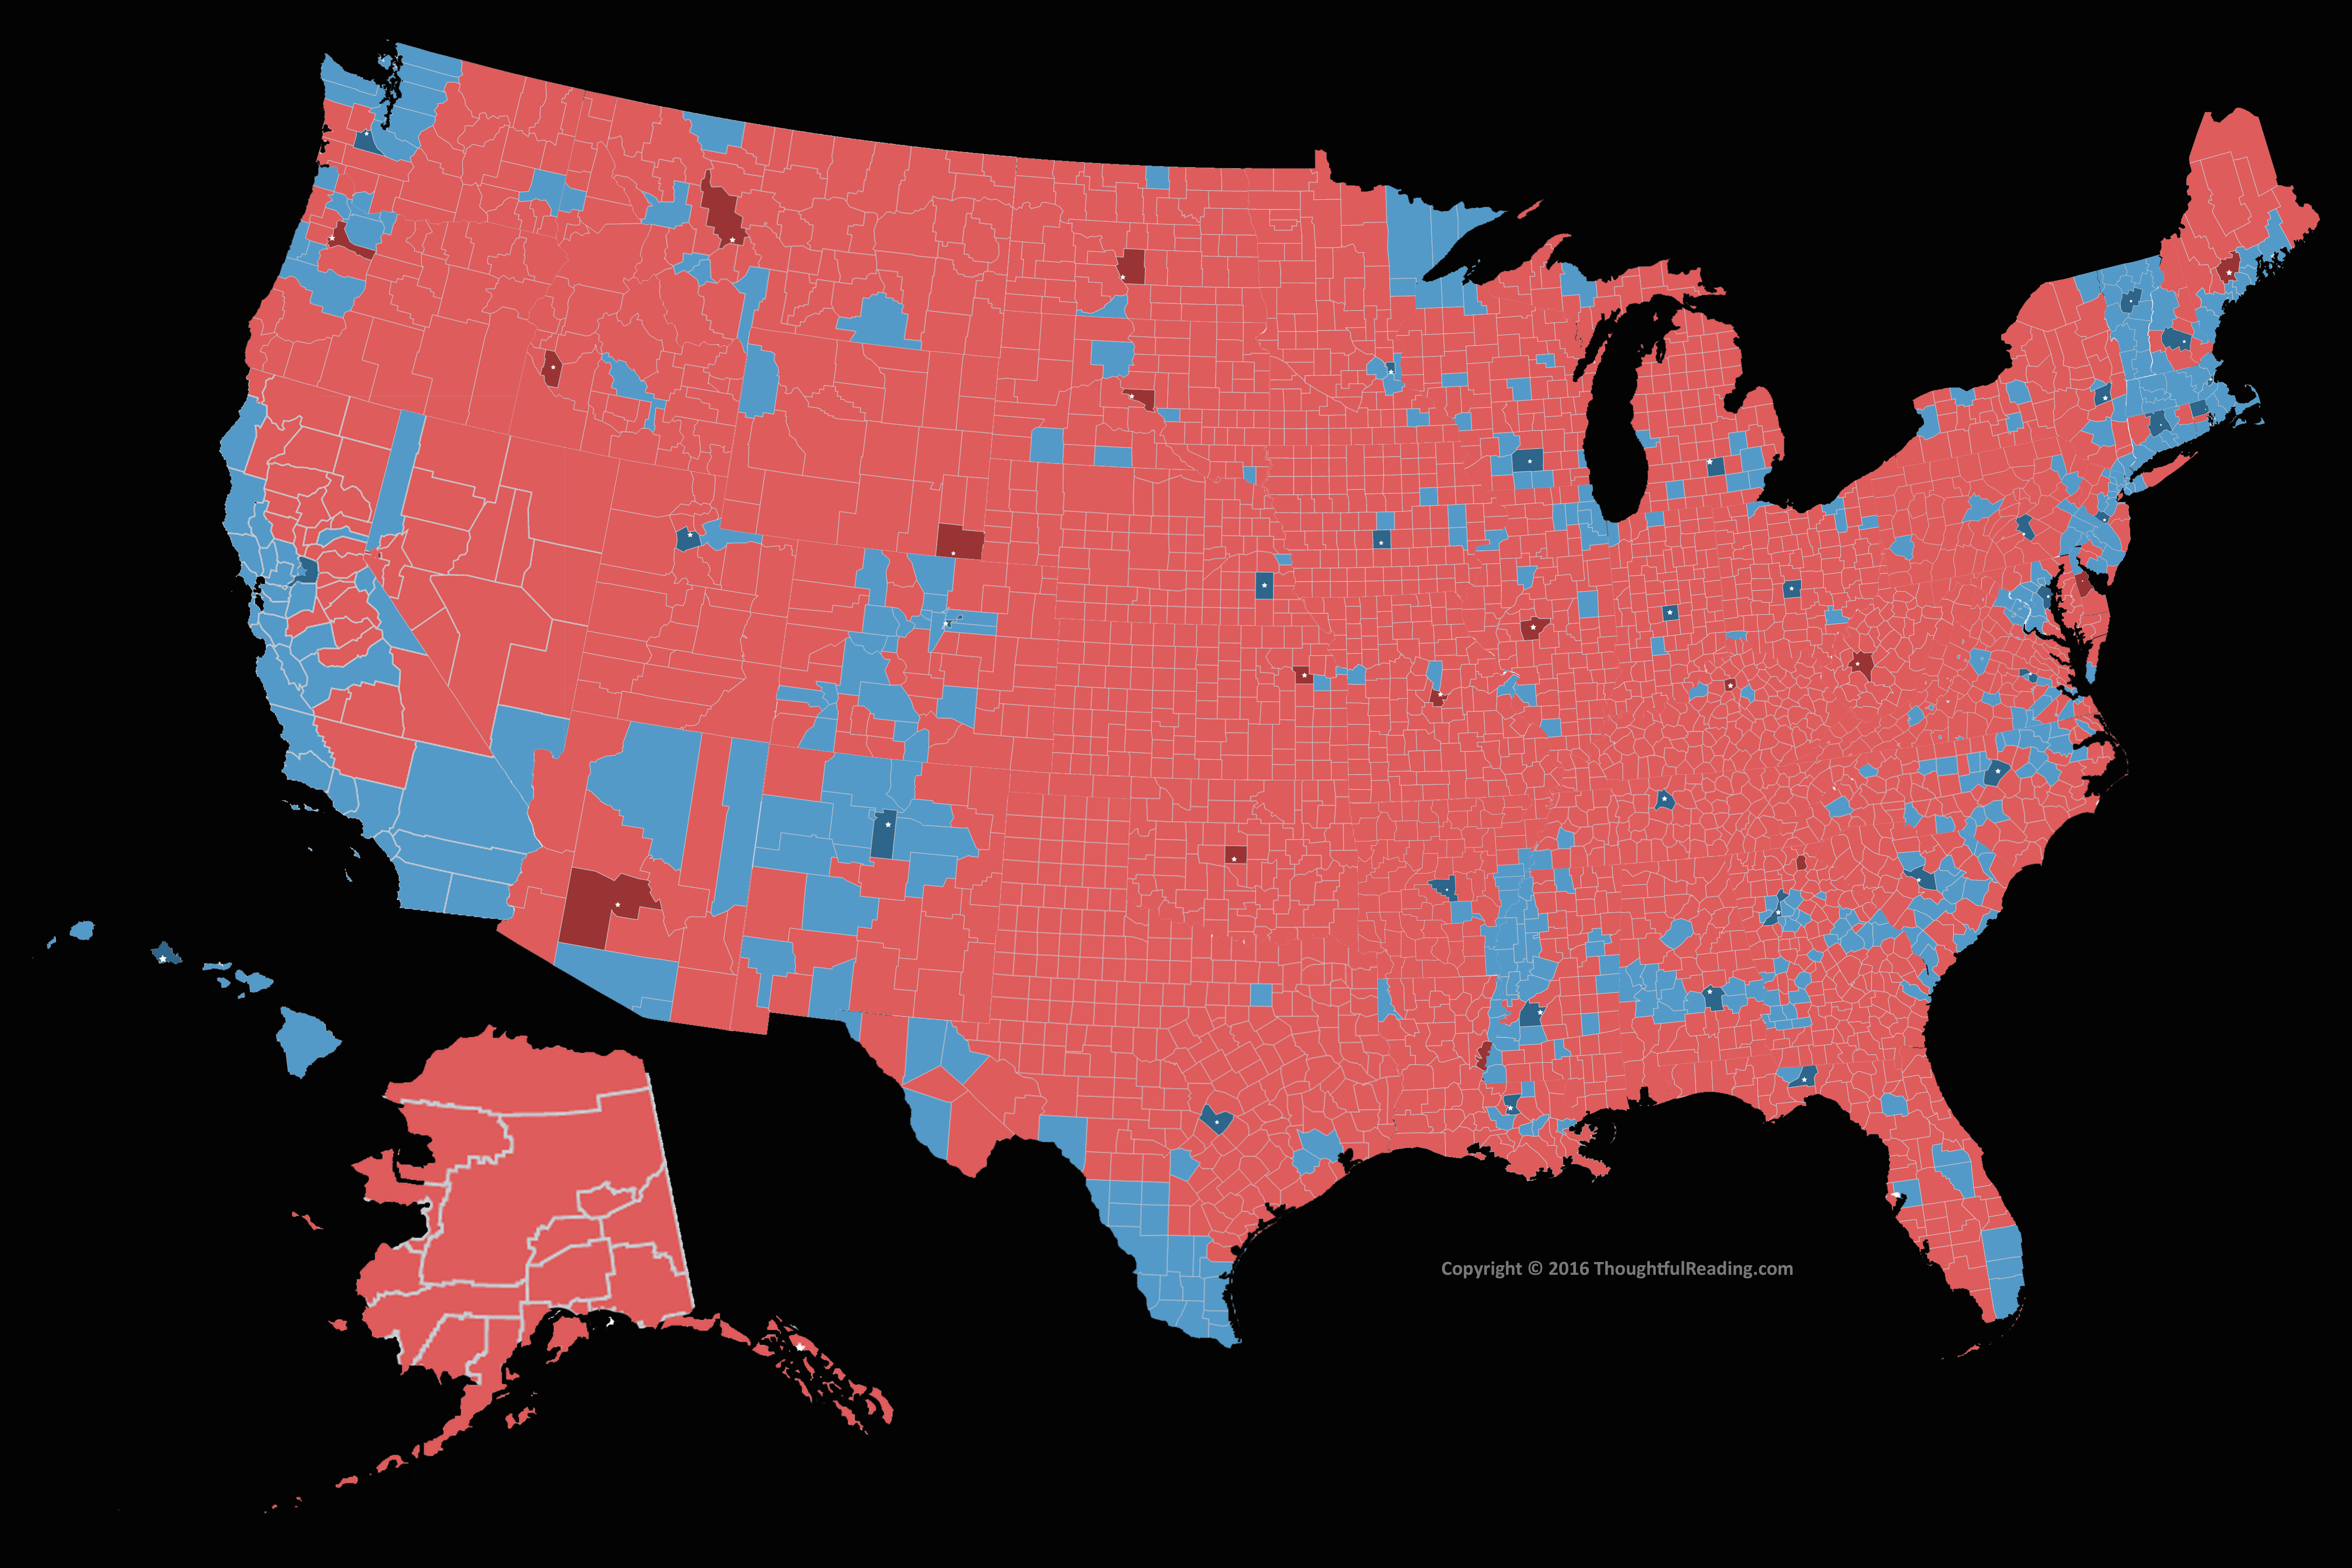 nytimes 2016 election map